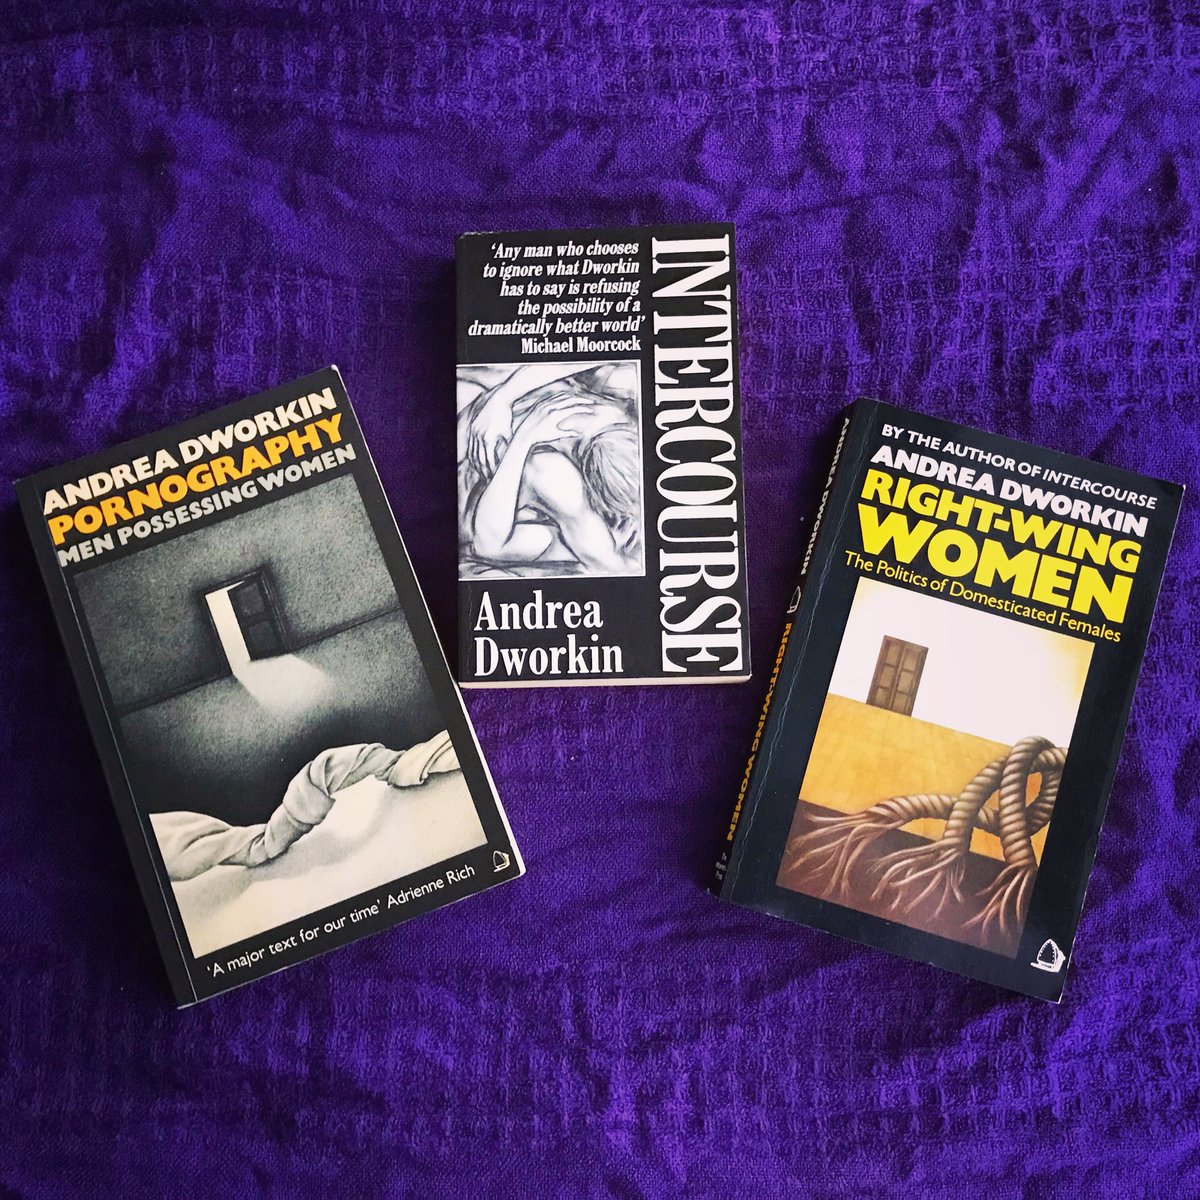  Pornography Intercourse Right-Wing WomenAndrea Dworkin’s writing holds the answers to some of today’s most pressing feminist issues: the mainstreaming of pornography, the normalisation of far right politics, and the problem of male supremacy. #OurFeministLibrary